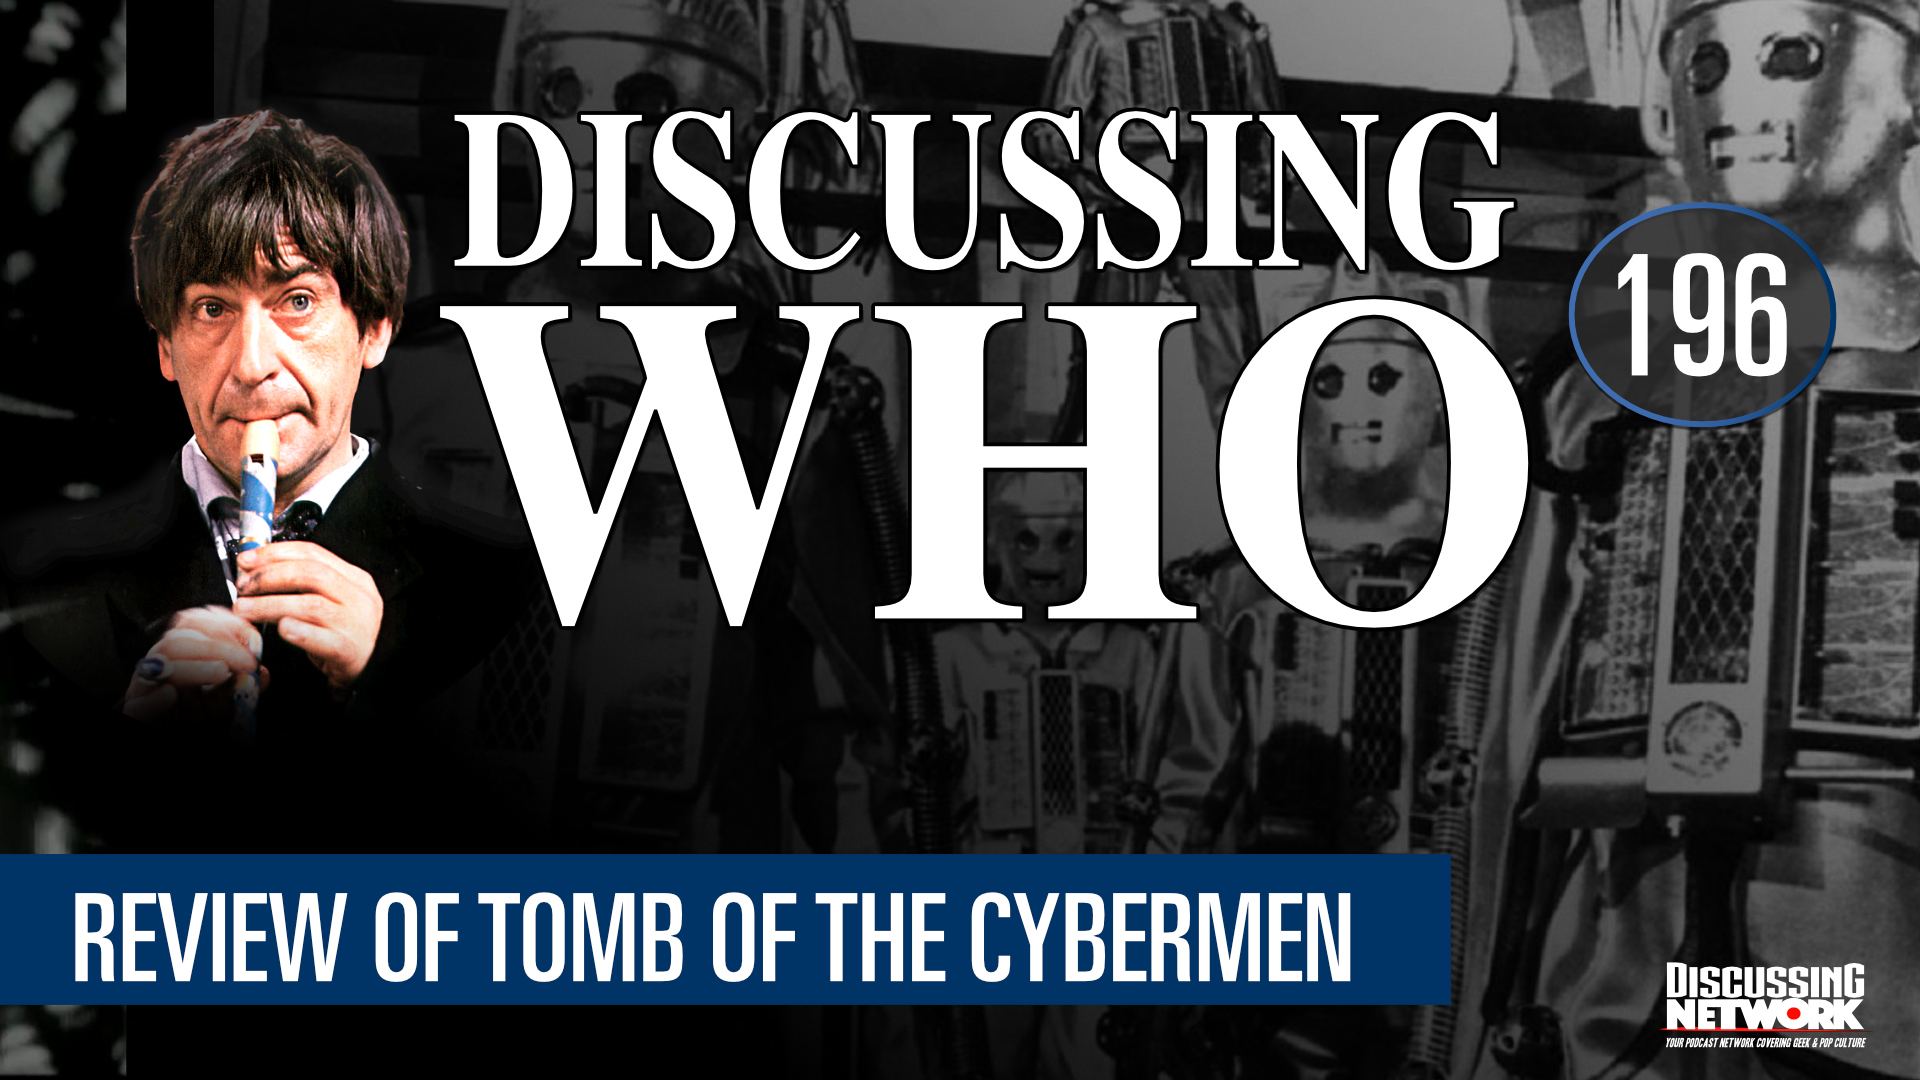 Review of Tomb of the Cybermen